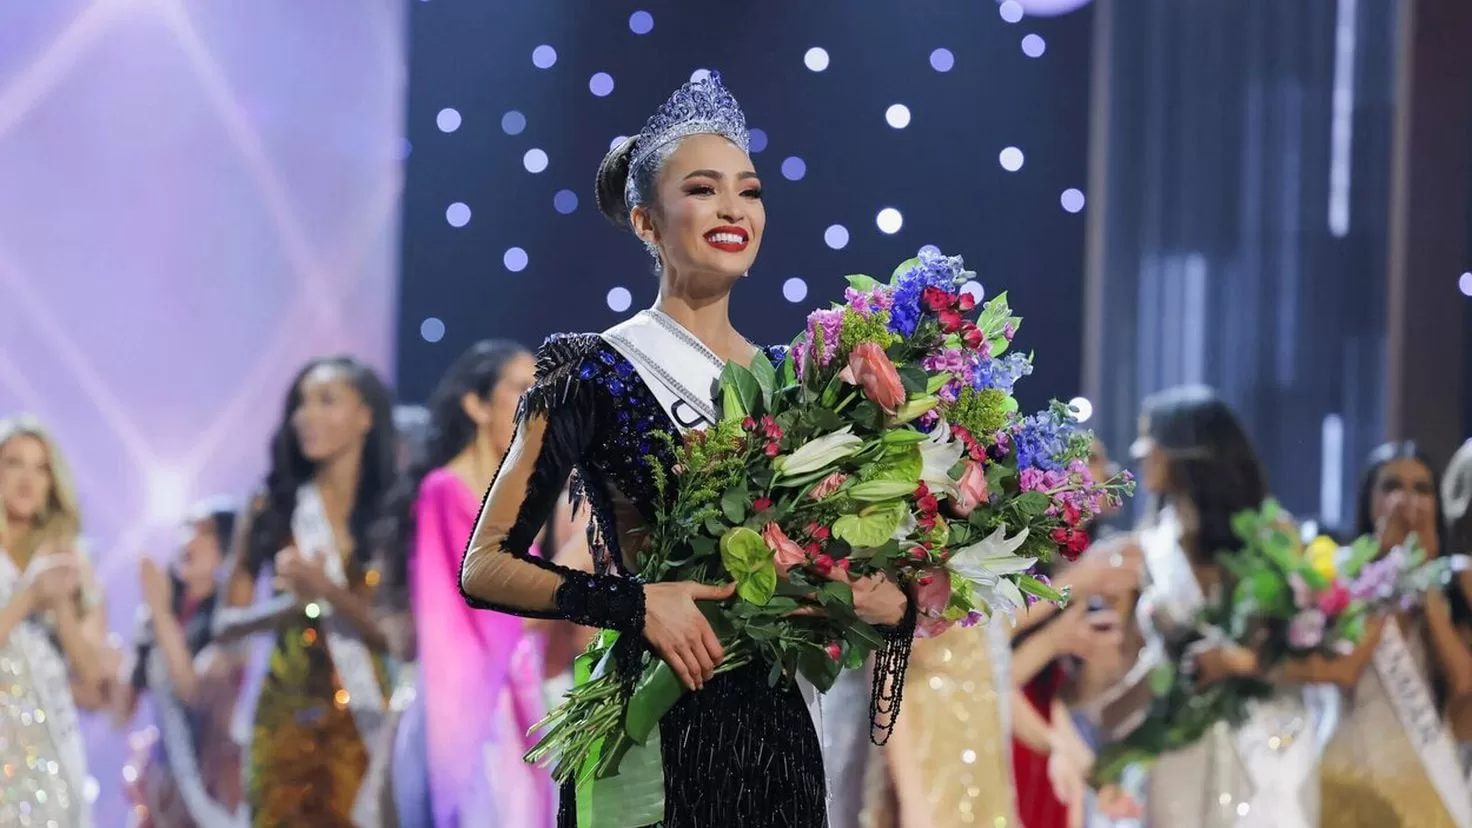 Will Miss Universe 2023 keep the winner's crown?
